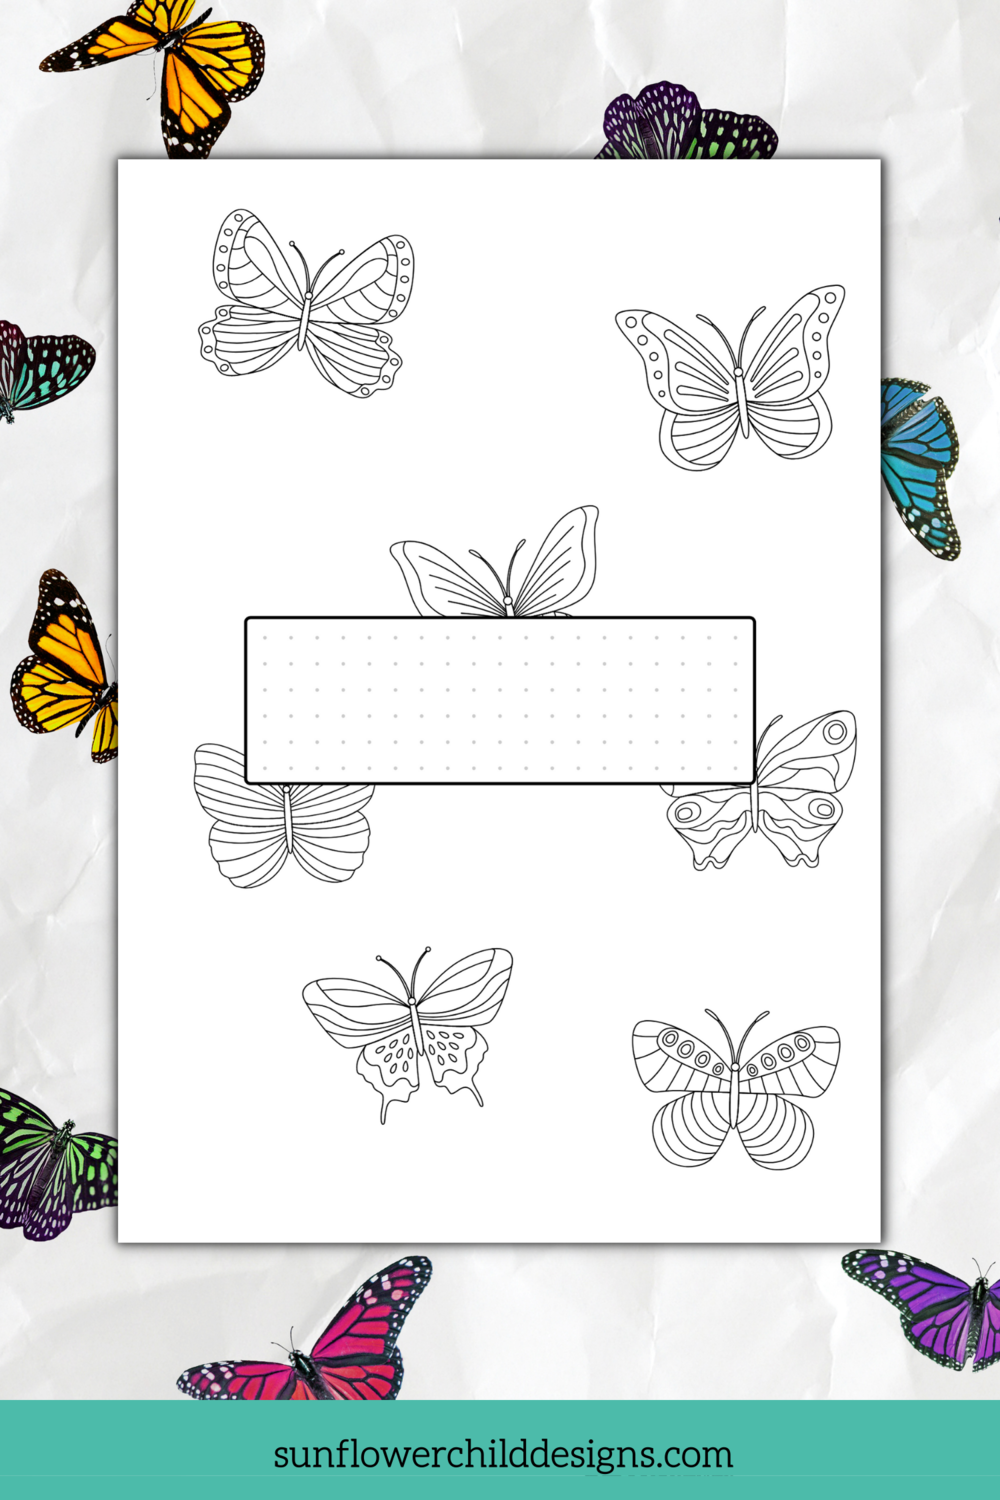 Achieve Your Goals with Butterfly Habit Trackers